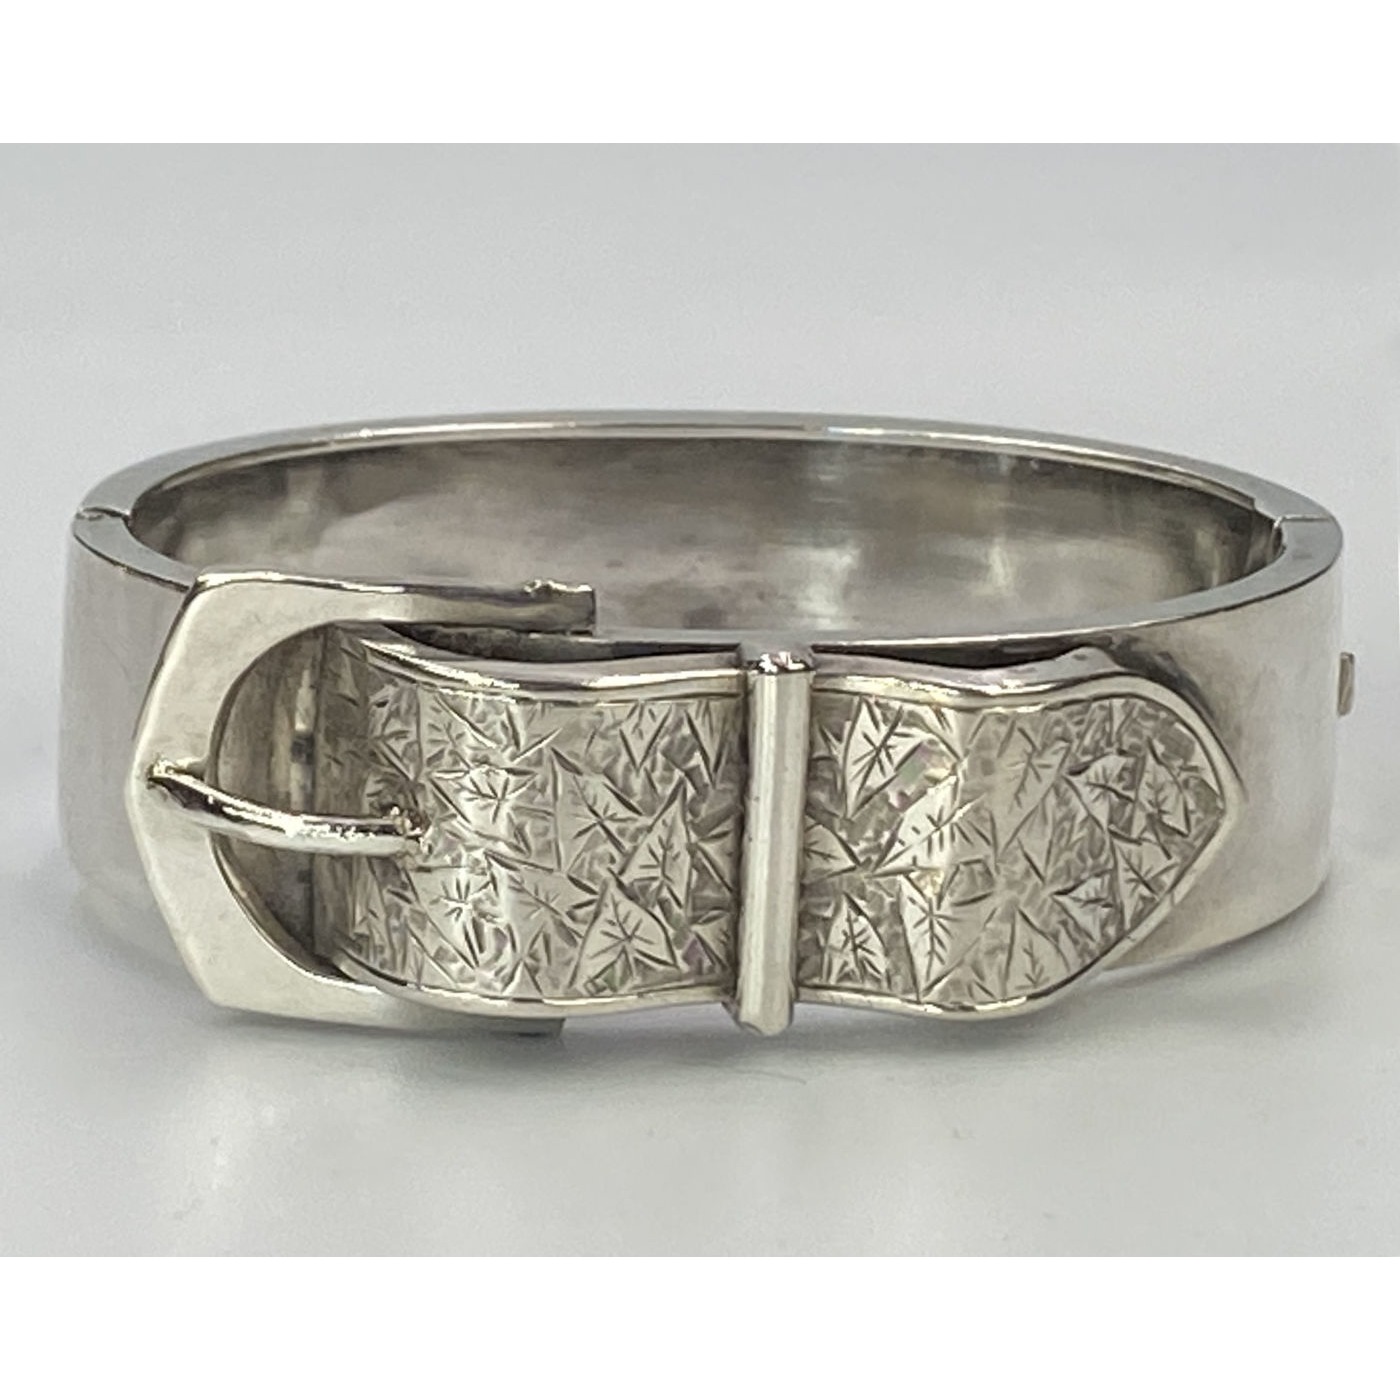 Unusual Curved Belt Buckle Silver English Bangle